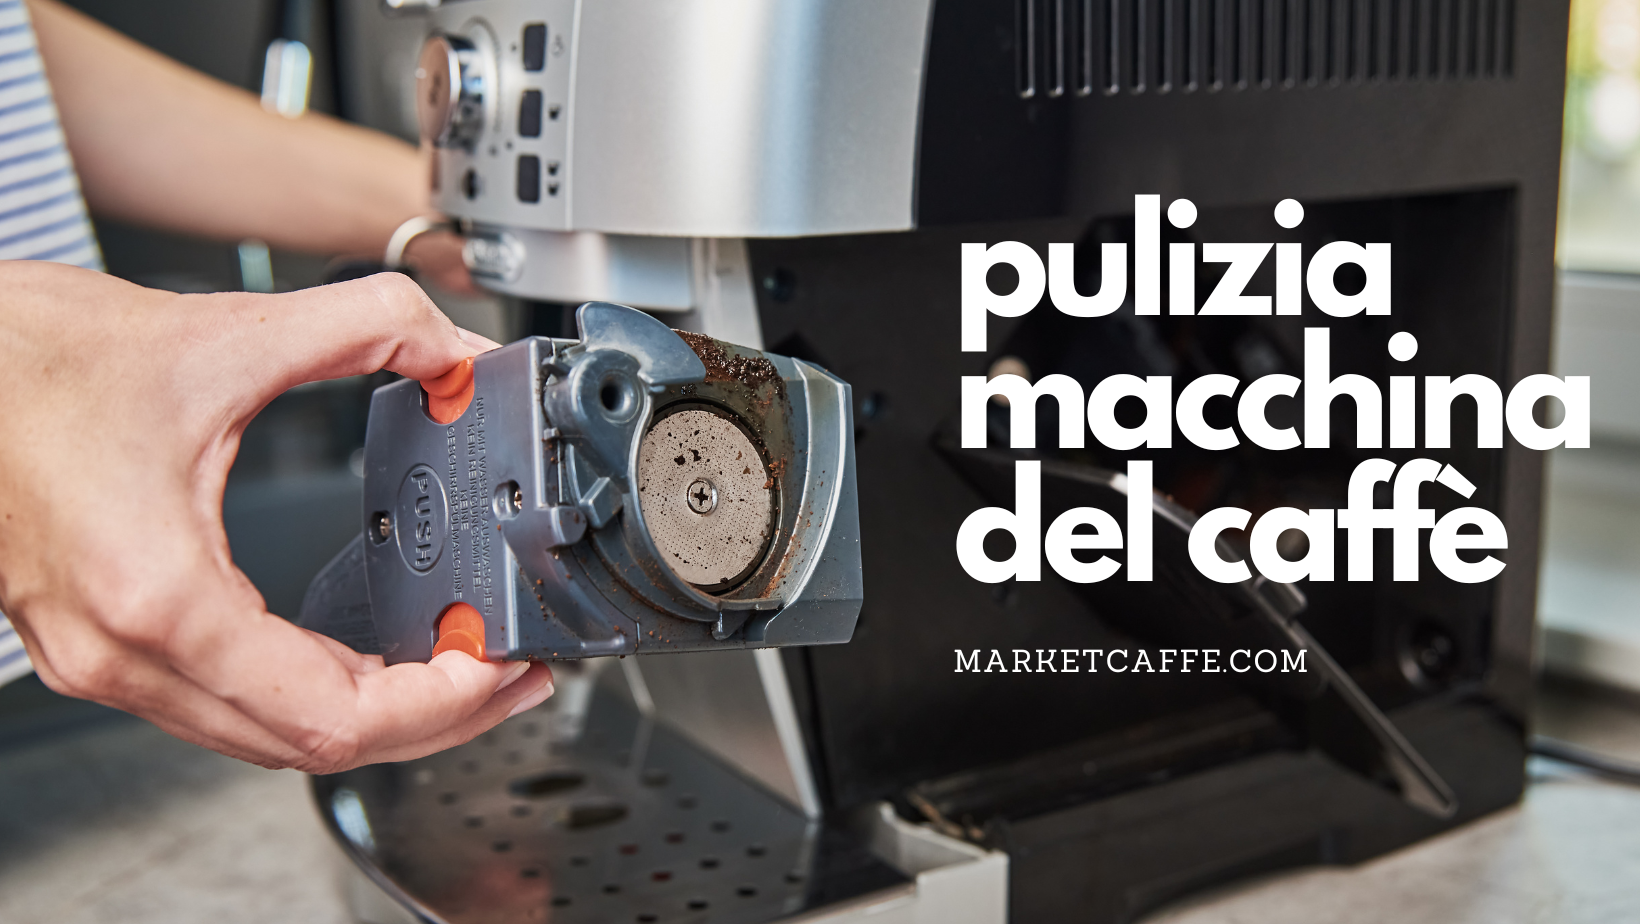 How to clean the pod or capsule coffee machine? - MarketCaffe